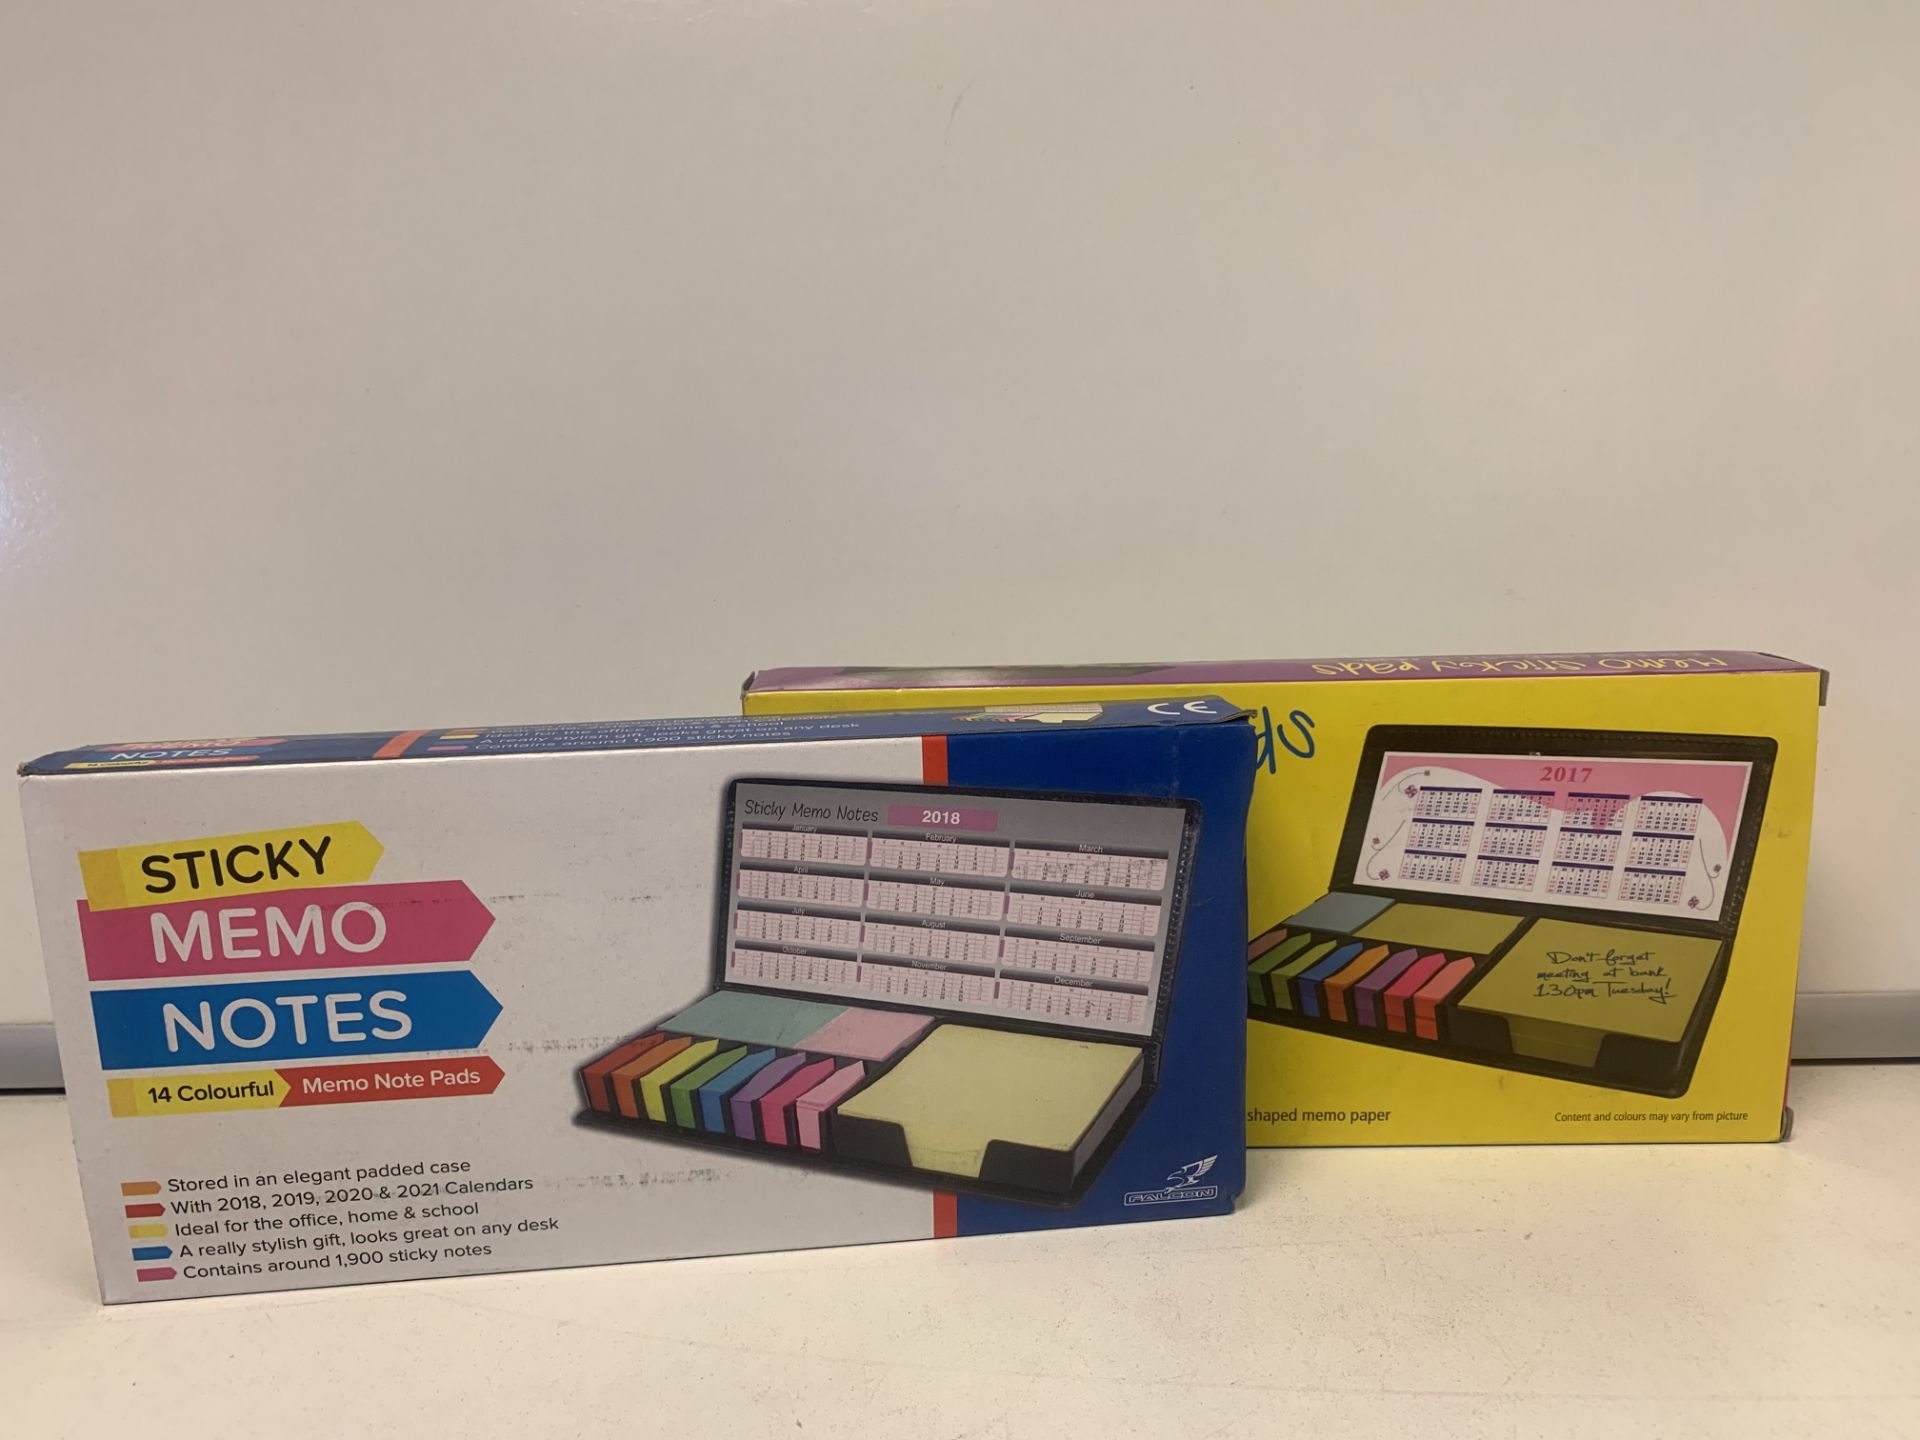 60 X NEW LARGE MEMO STICKY PADS SETS IN LARGE STYLISH CASE